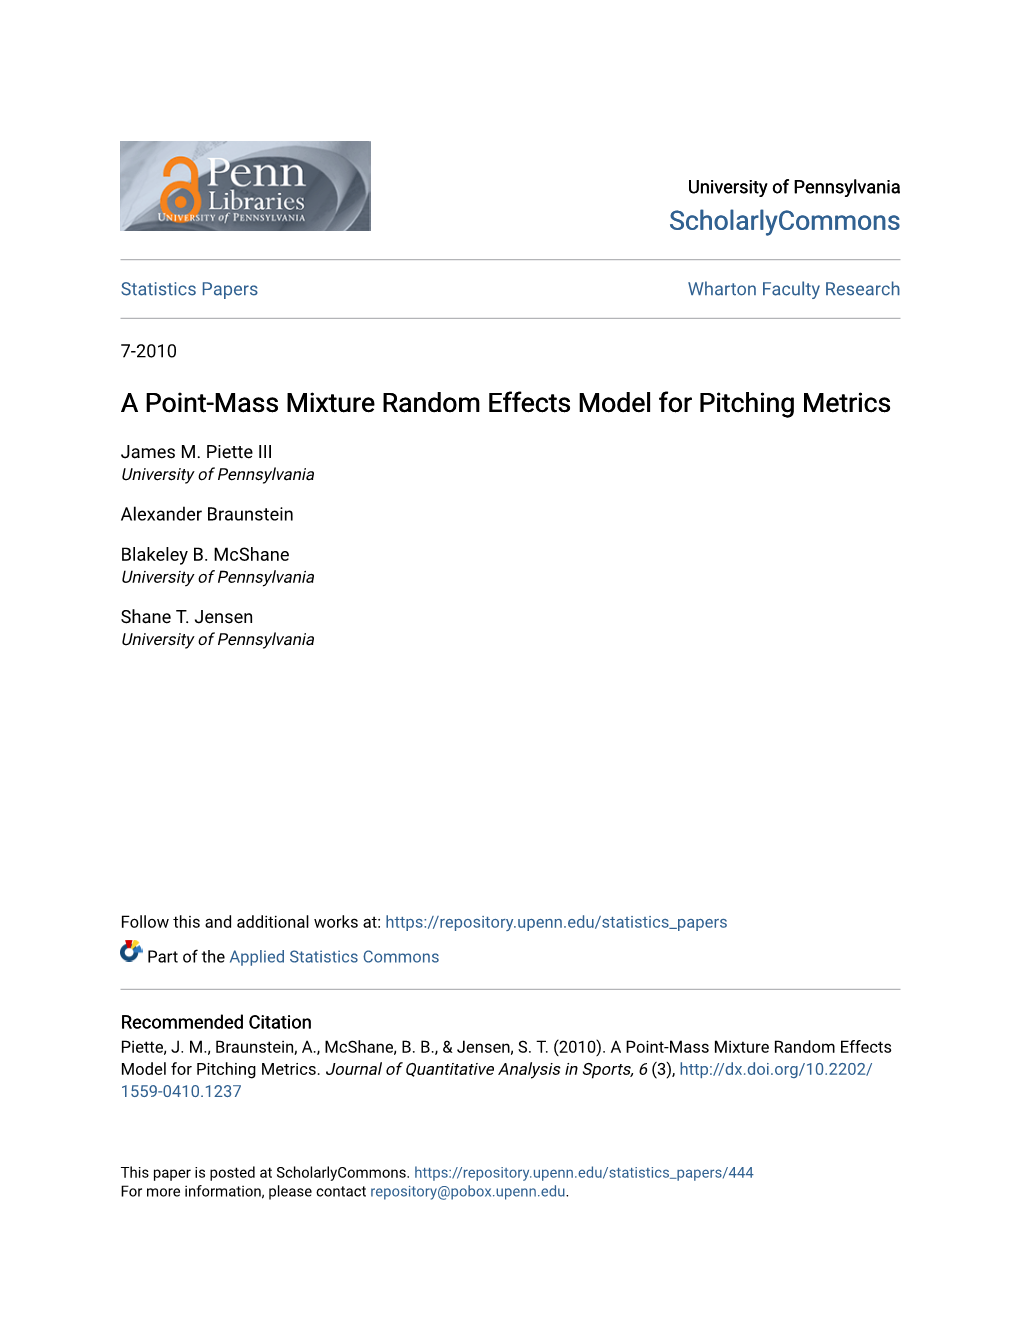 A Point-Mass Mixture Random Effects Model for Pitching Metrics